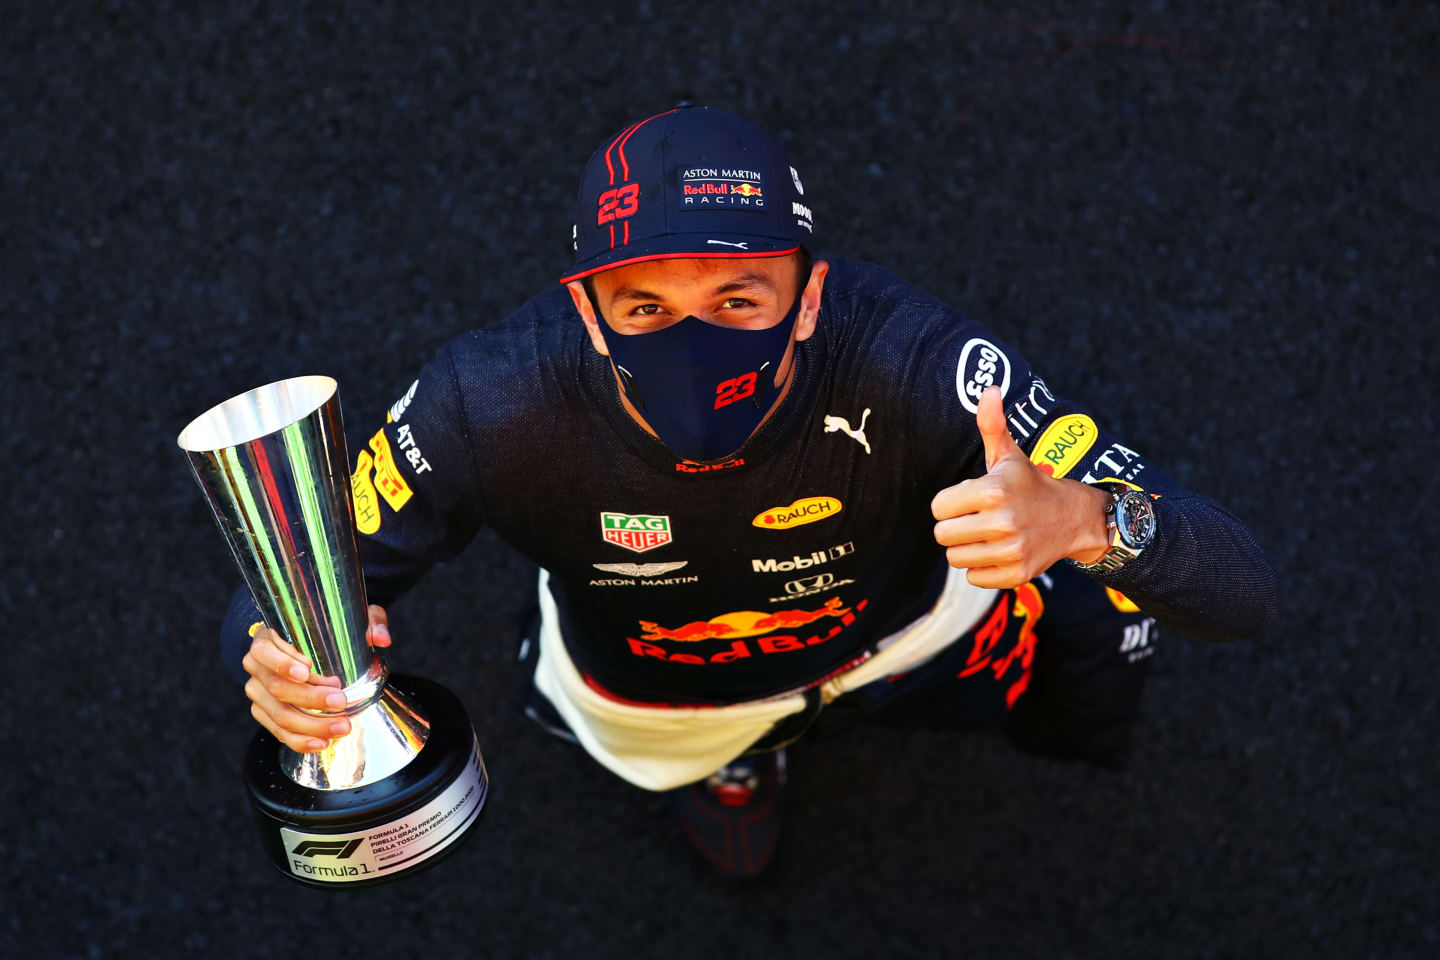 SCARPERIA, ITALY - SEPTEMBER 13: Third placed Alexander Albon of Thailand and Red Bull Racing celebrates after the F1 Grand Prix of Tuscany at Mugello Circuit on September 13, 2020 in Scarperia, Italy. (Photo by Mark Thompson/Getty Images)